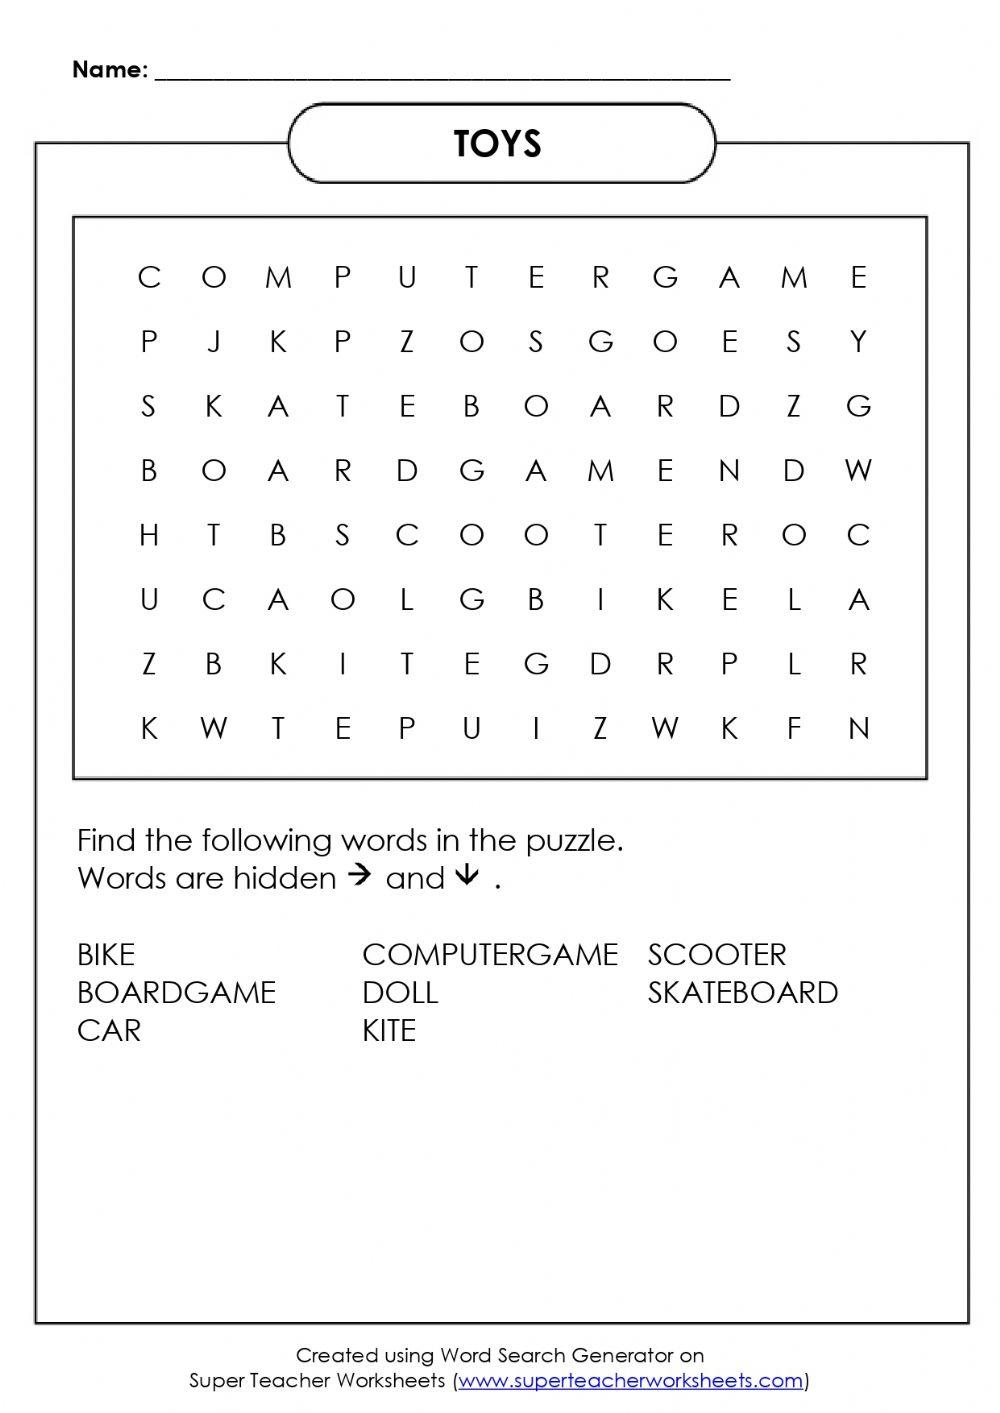 TOYS wordsearch